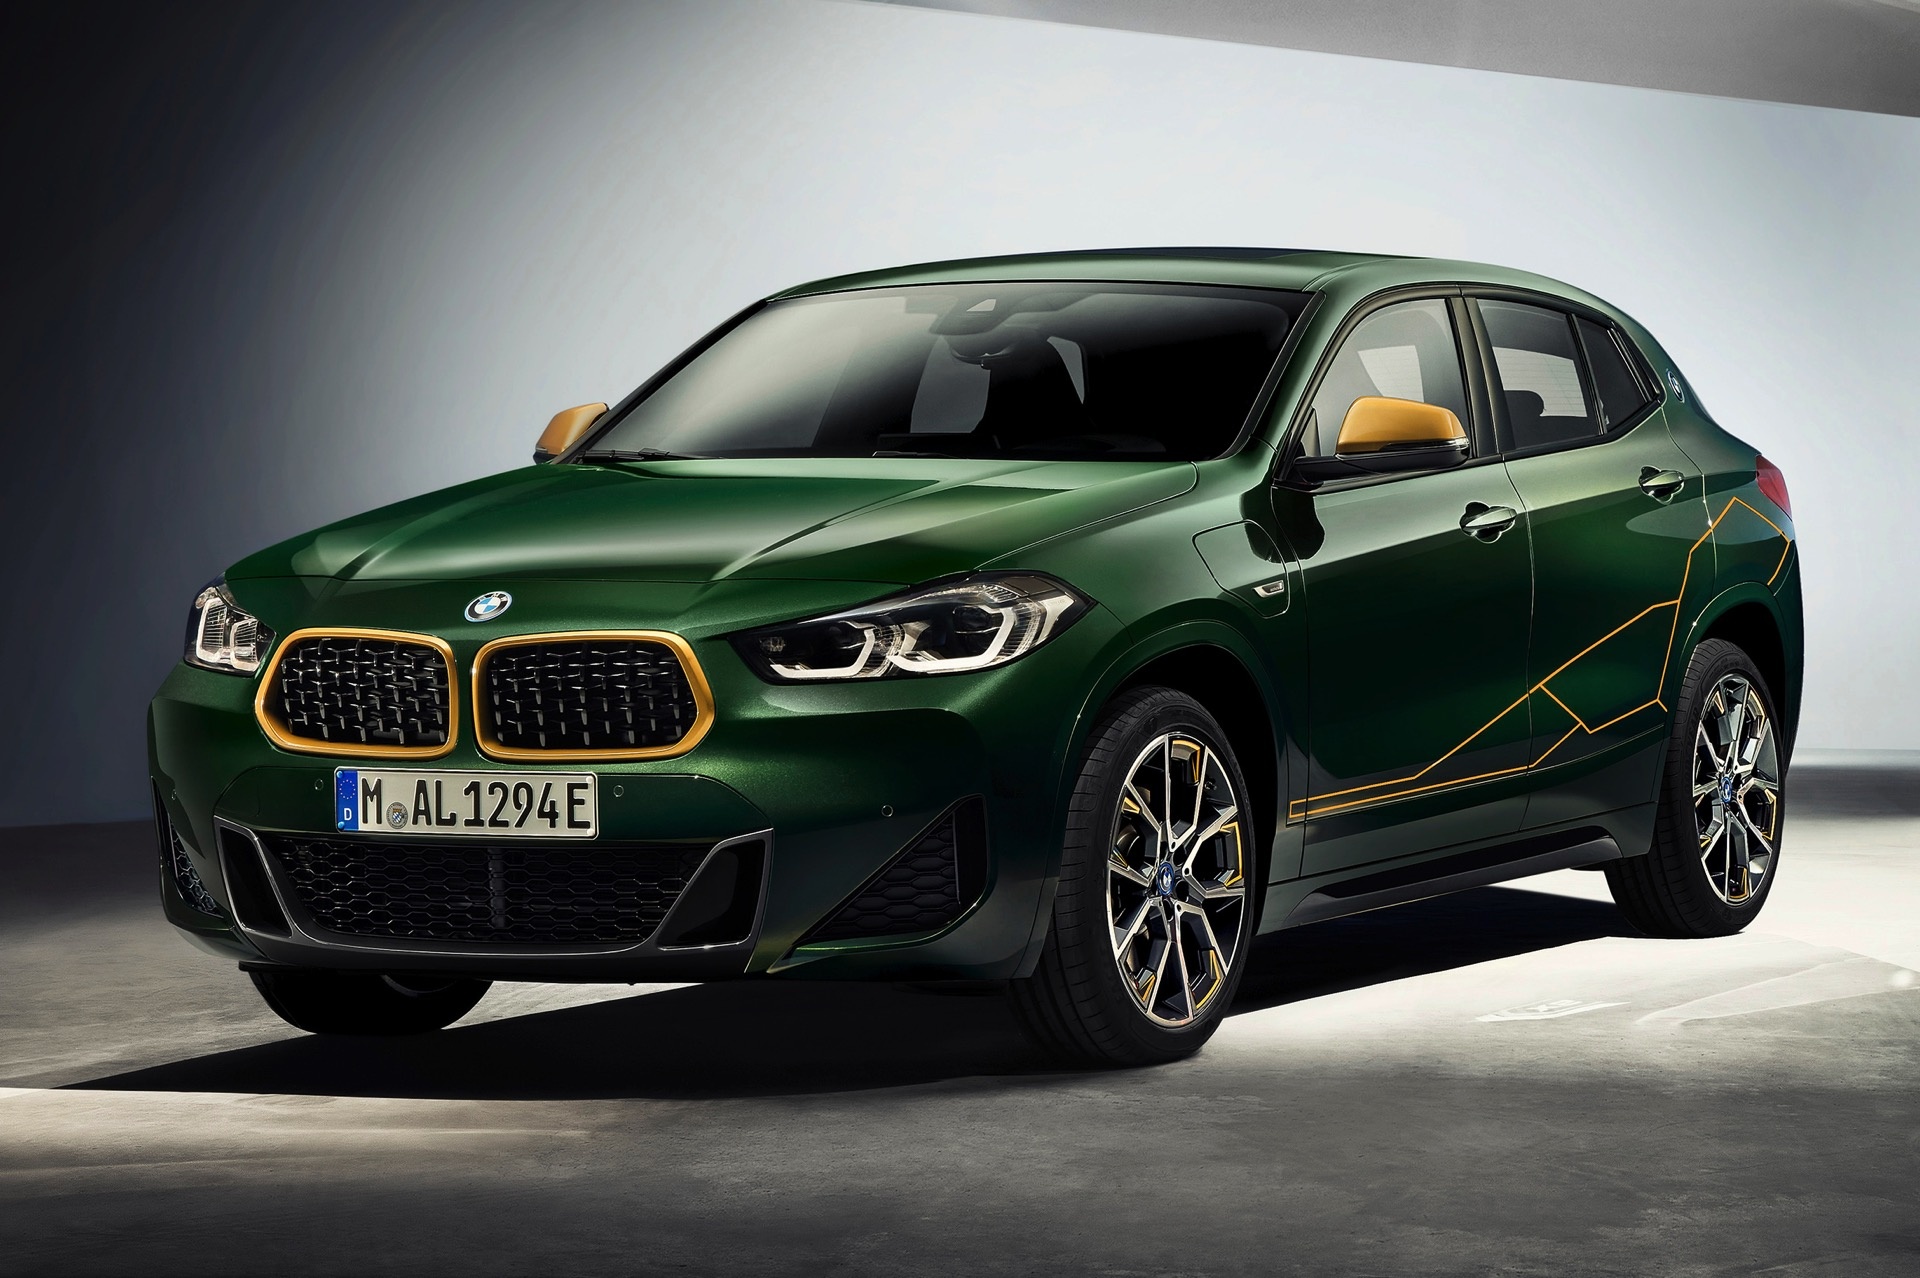 BMW X2, Goldplay edition, Exclusive details, Unmatched luxury, 1920x1280 HD Desktop